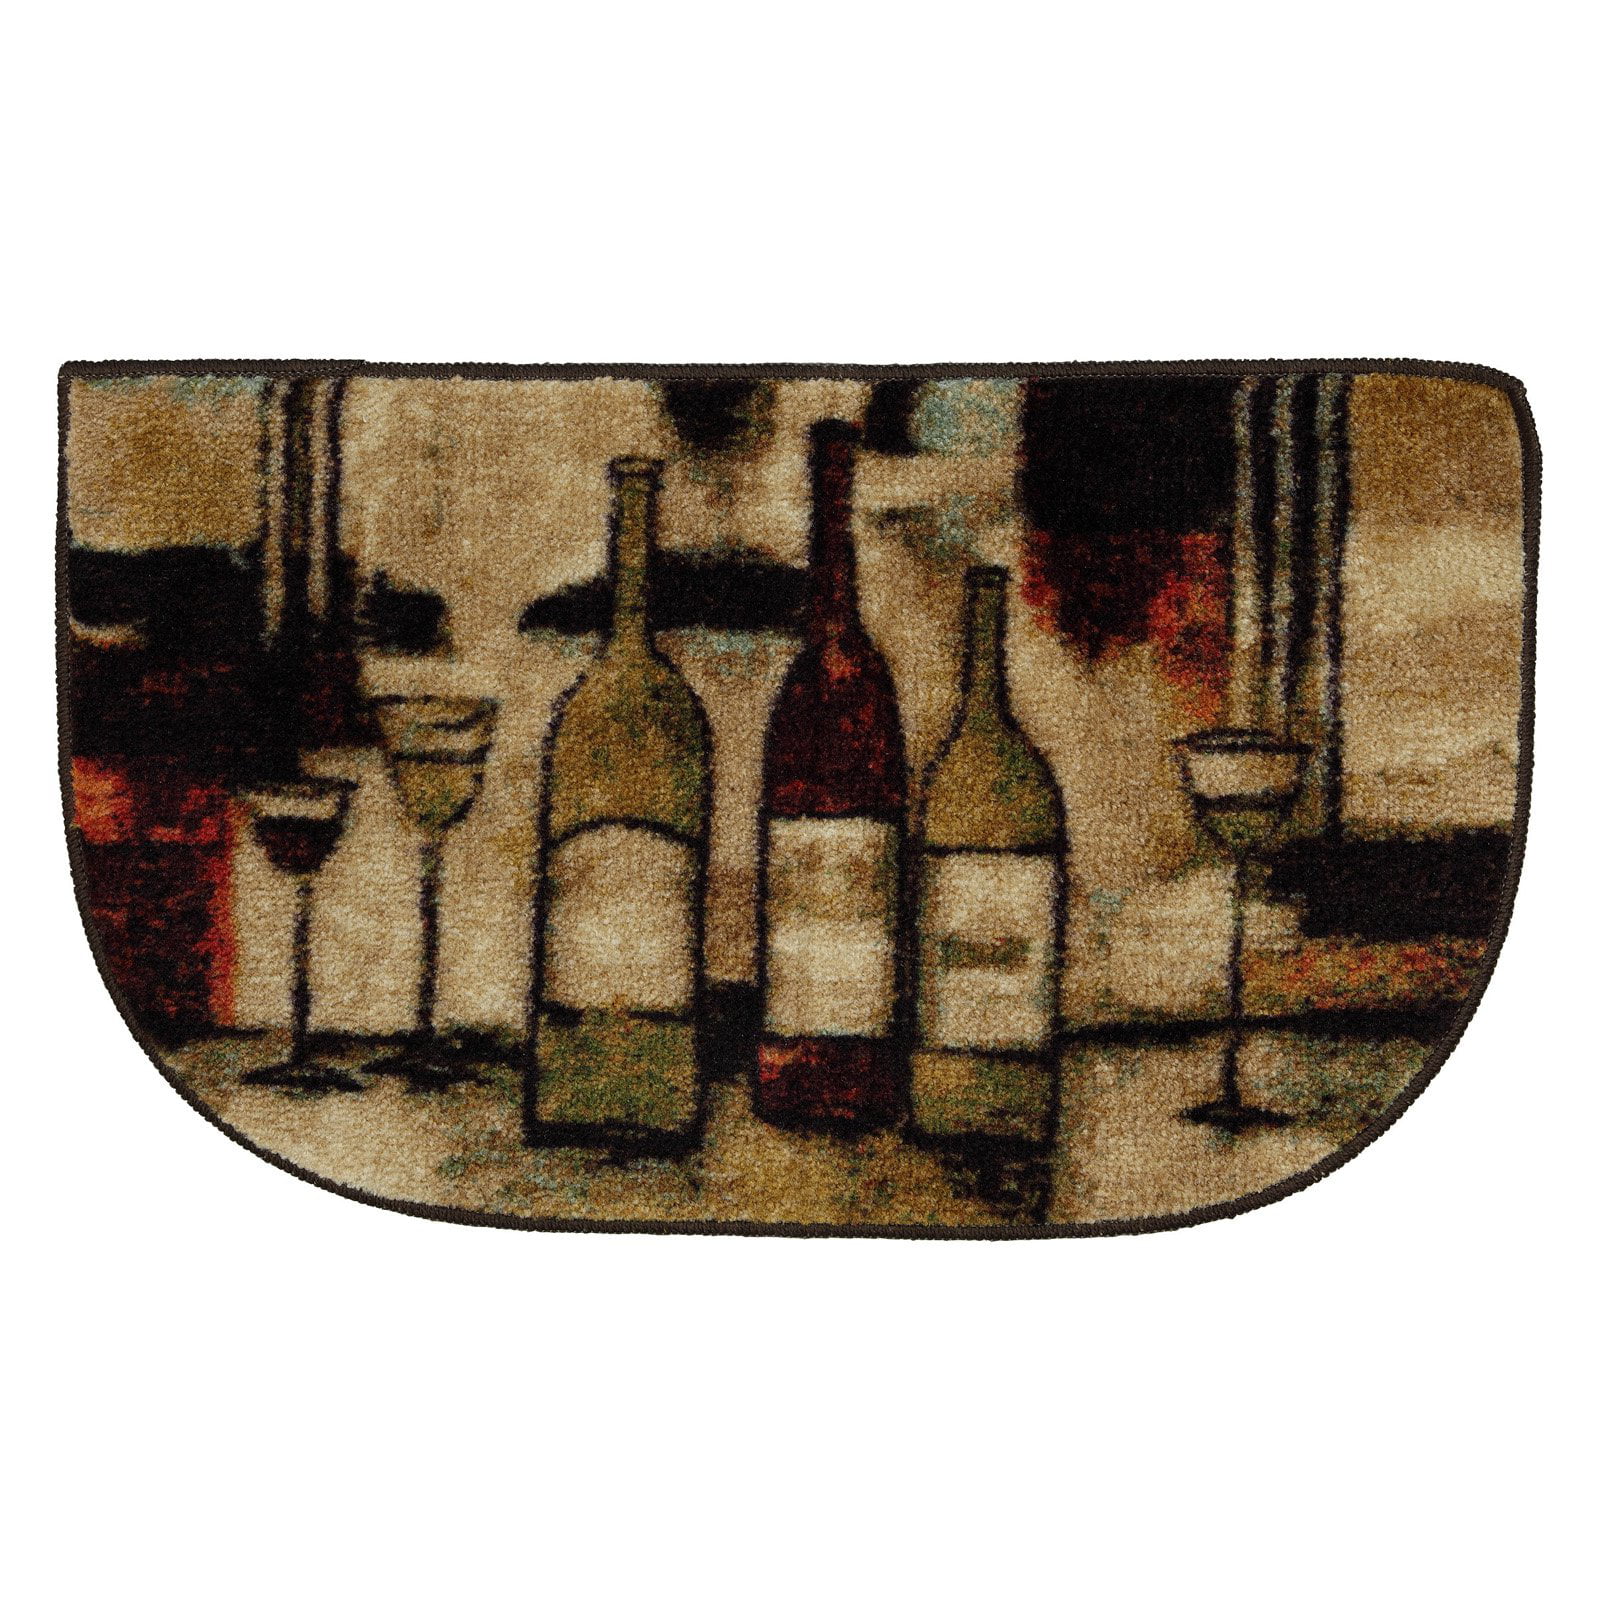 BASKET WITH FRUITS 18"x30" PRINTED NYLON KITCHEN RUG Cat nonskid latex back 